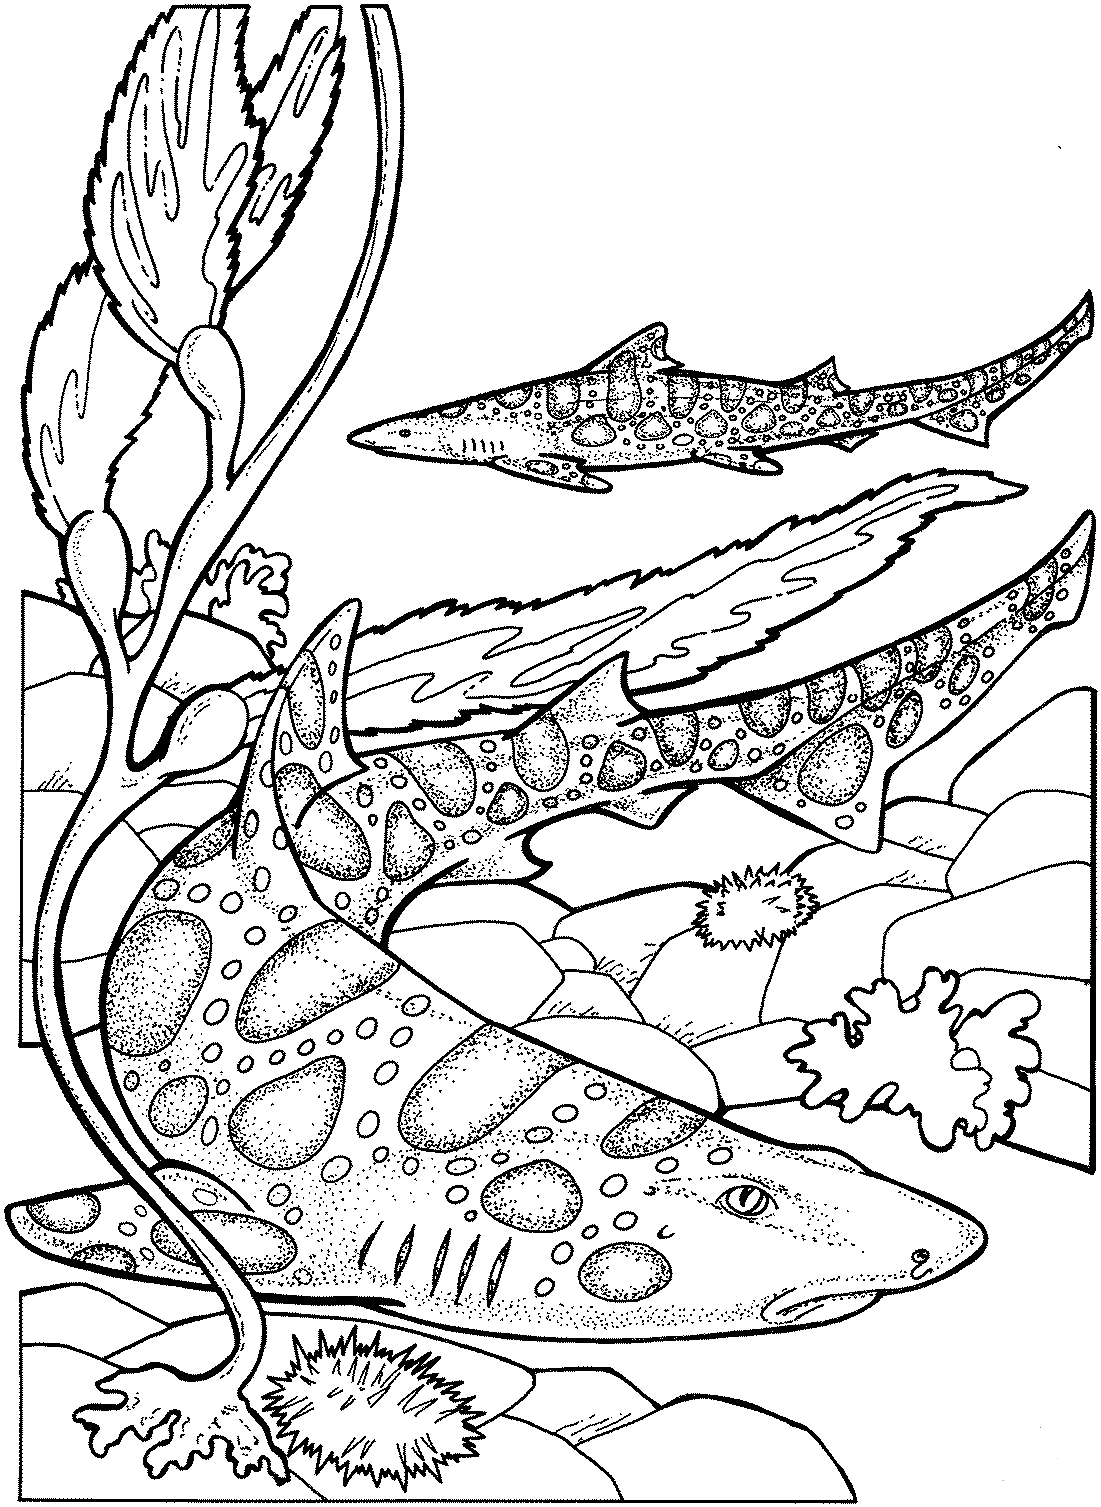 Leopard Sharks Coloring Page